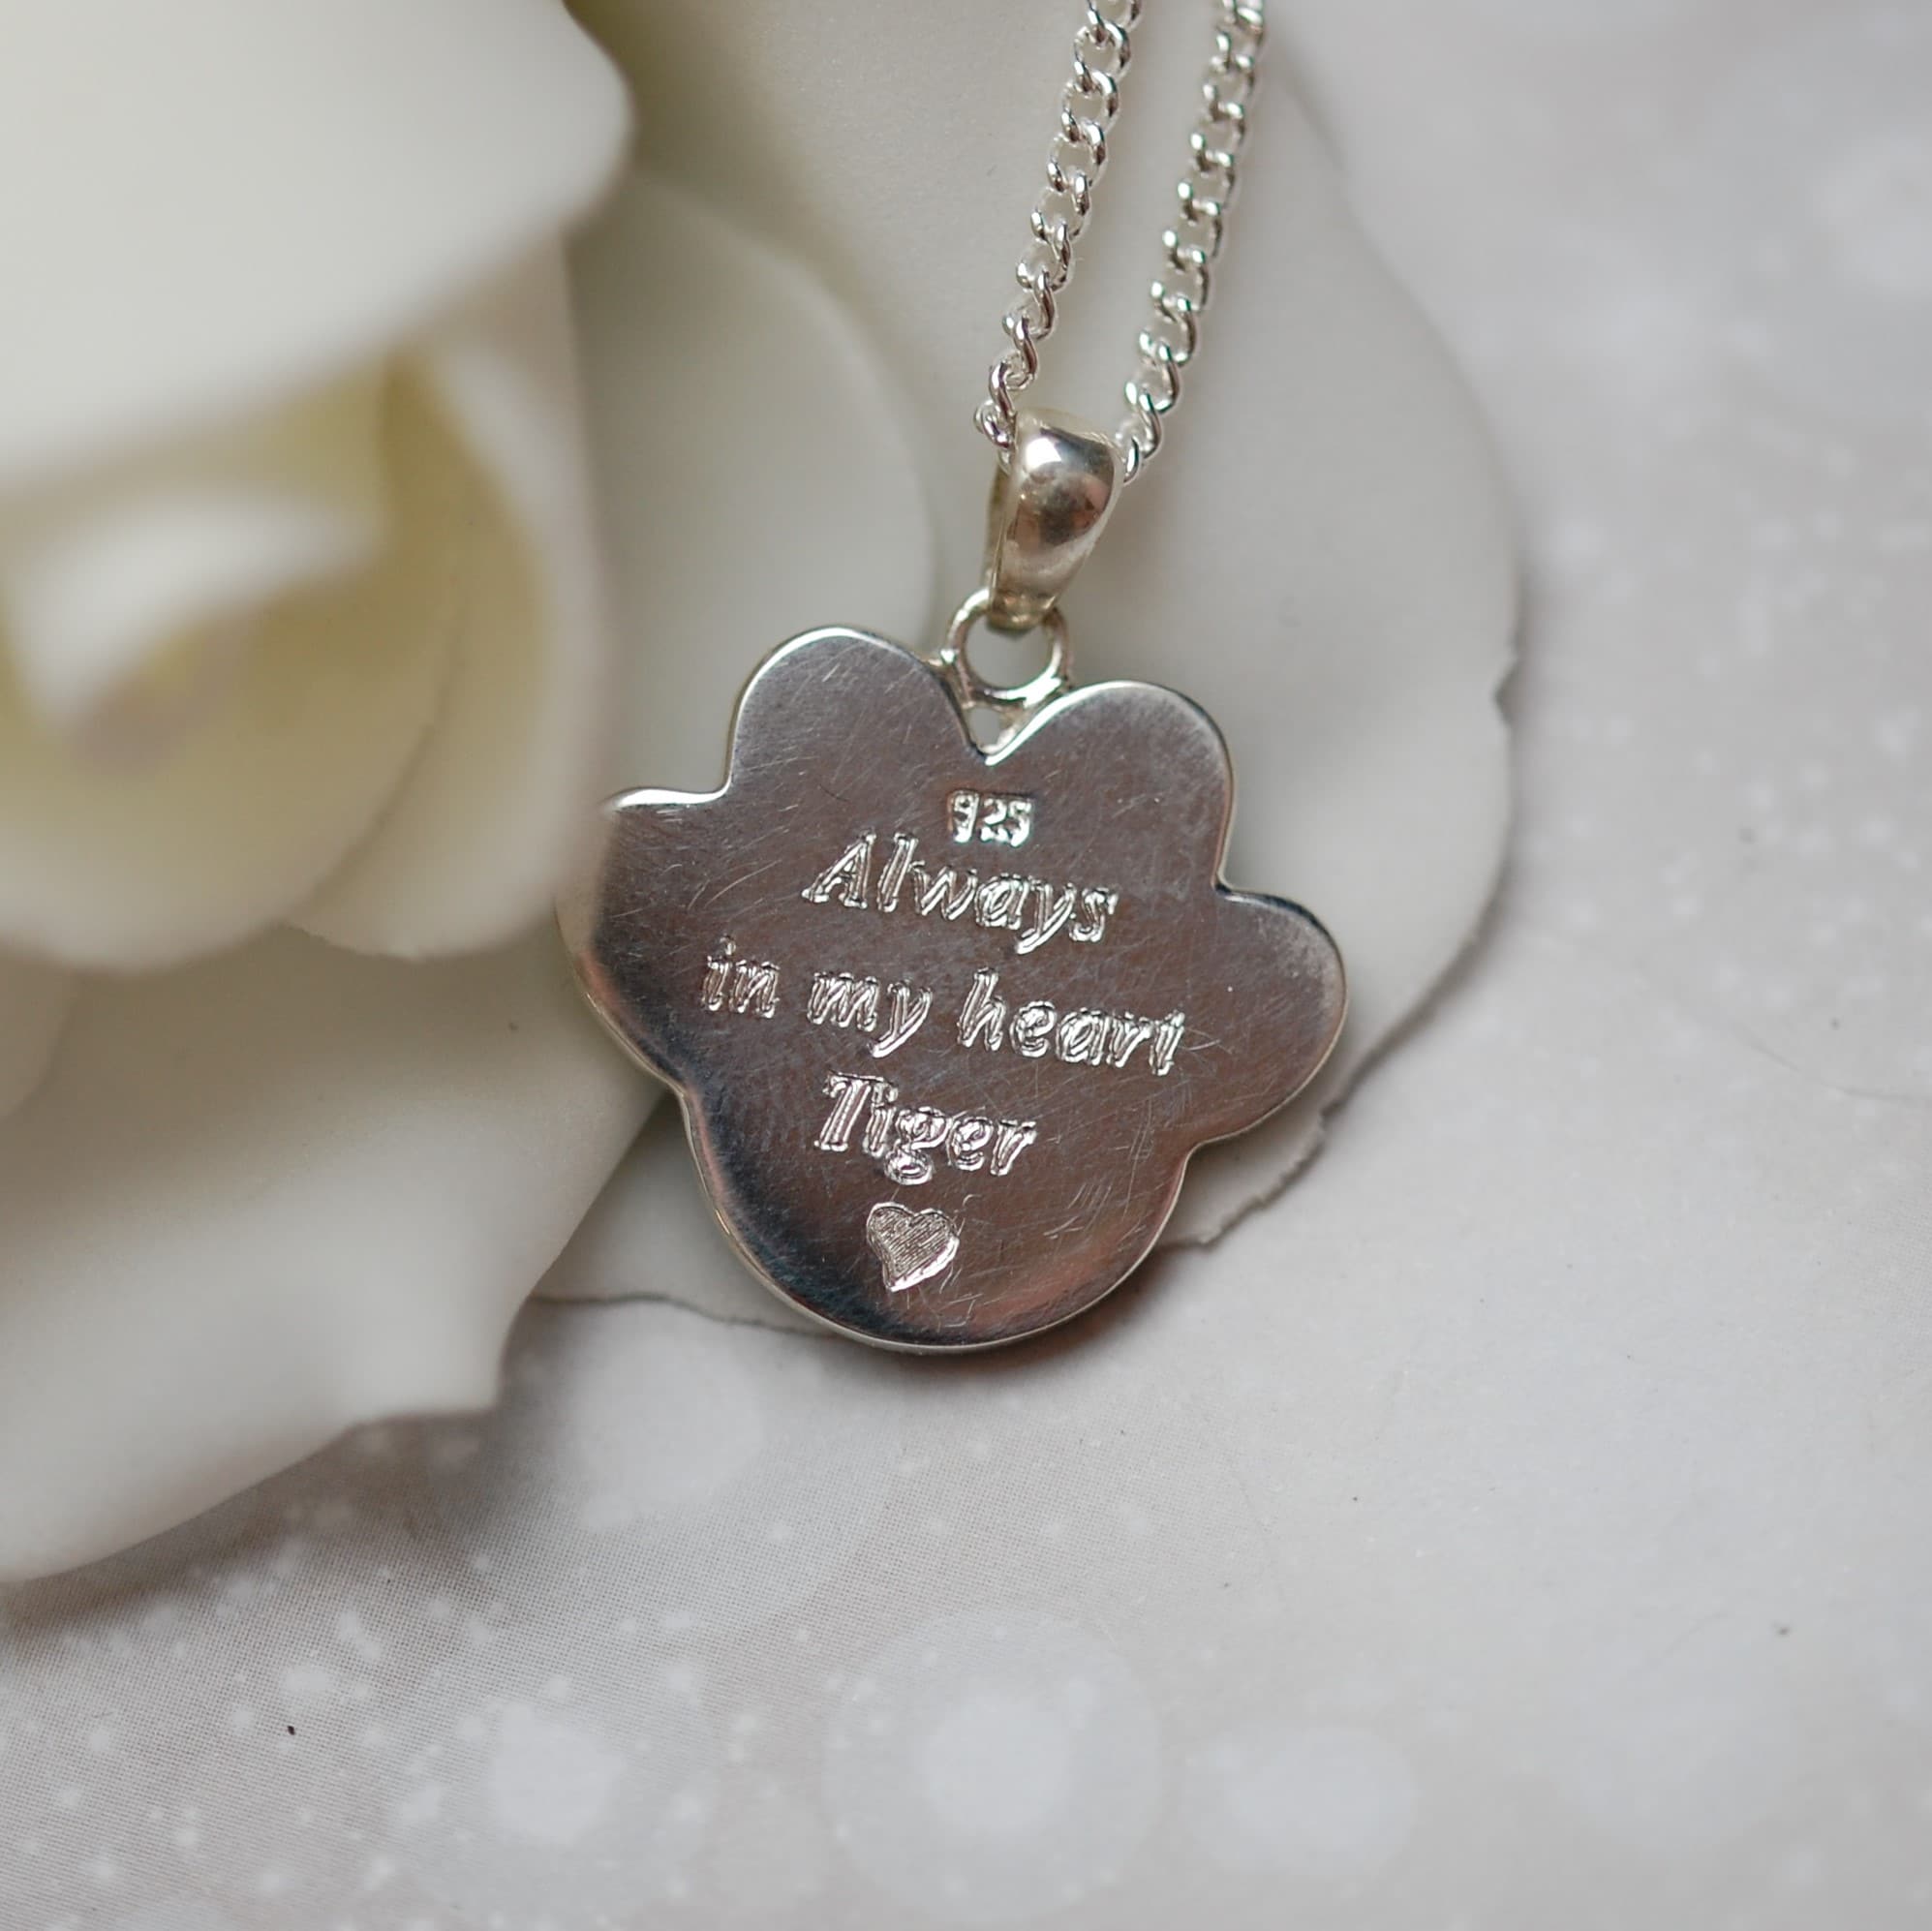 Pet name and message engraved on silver paw print pendant with pet fur or cremation ashes